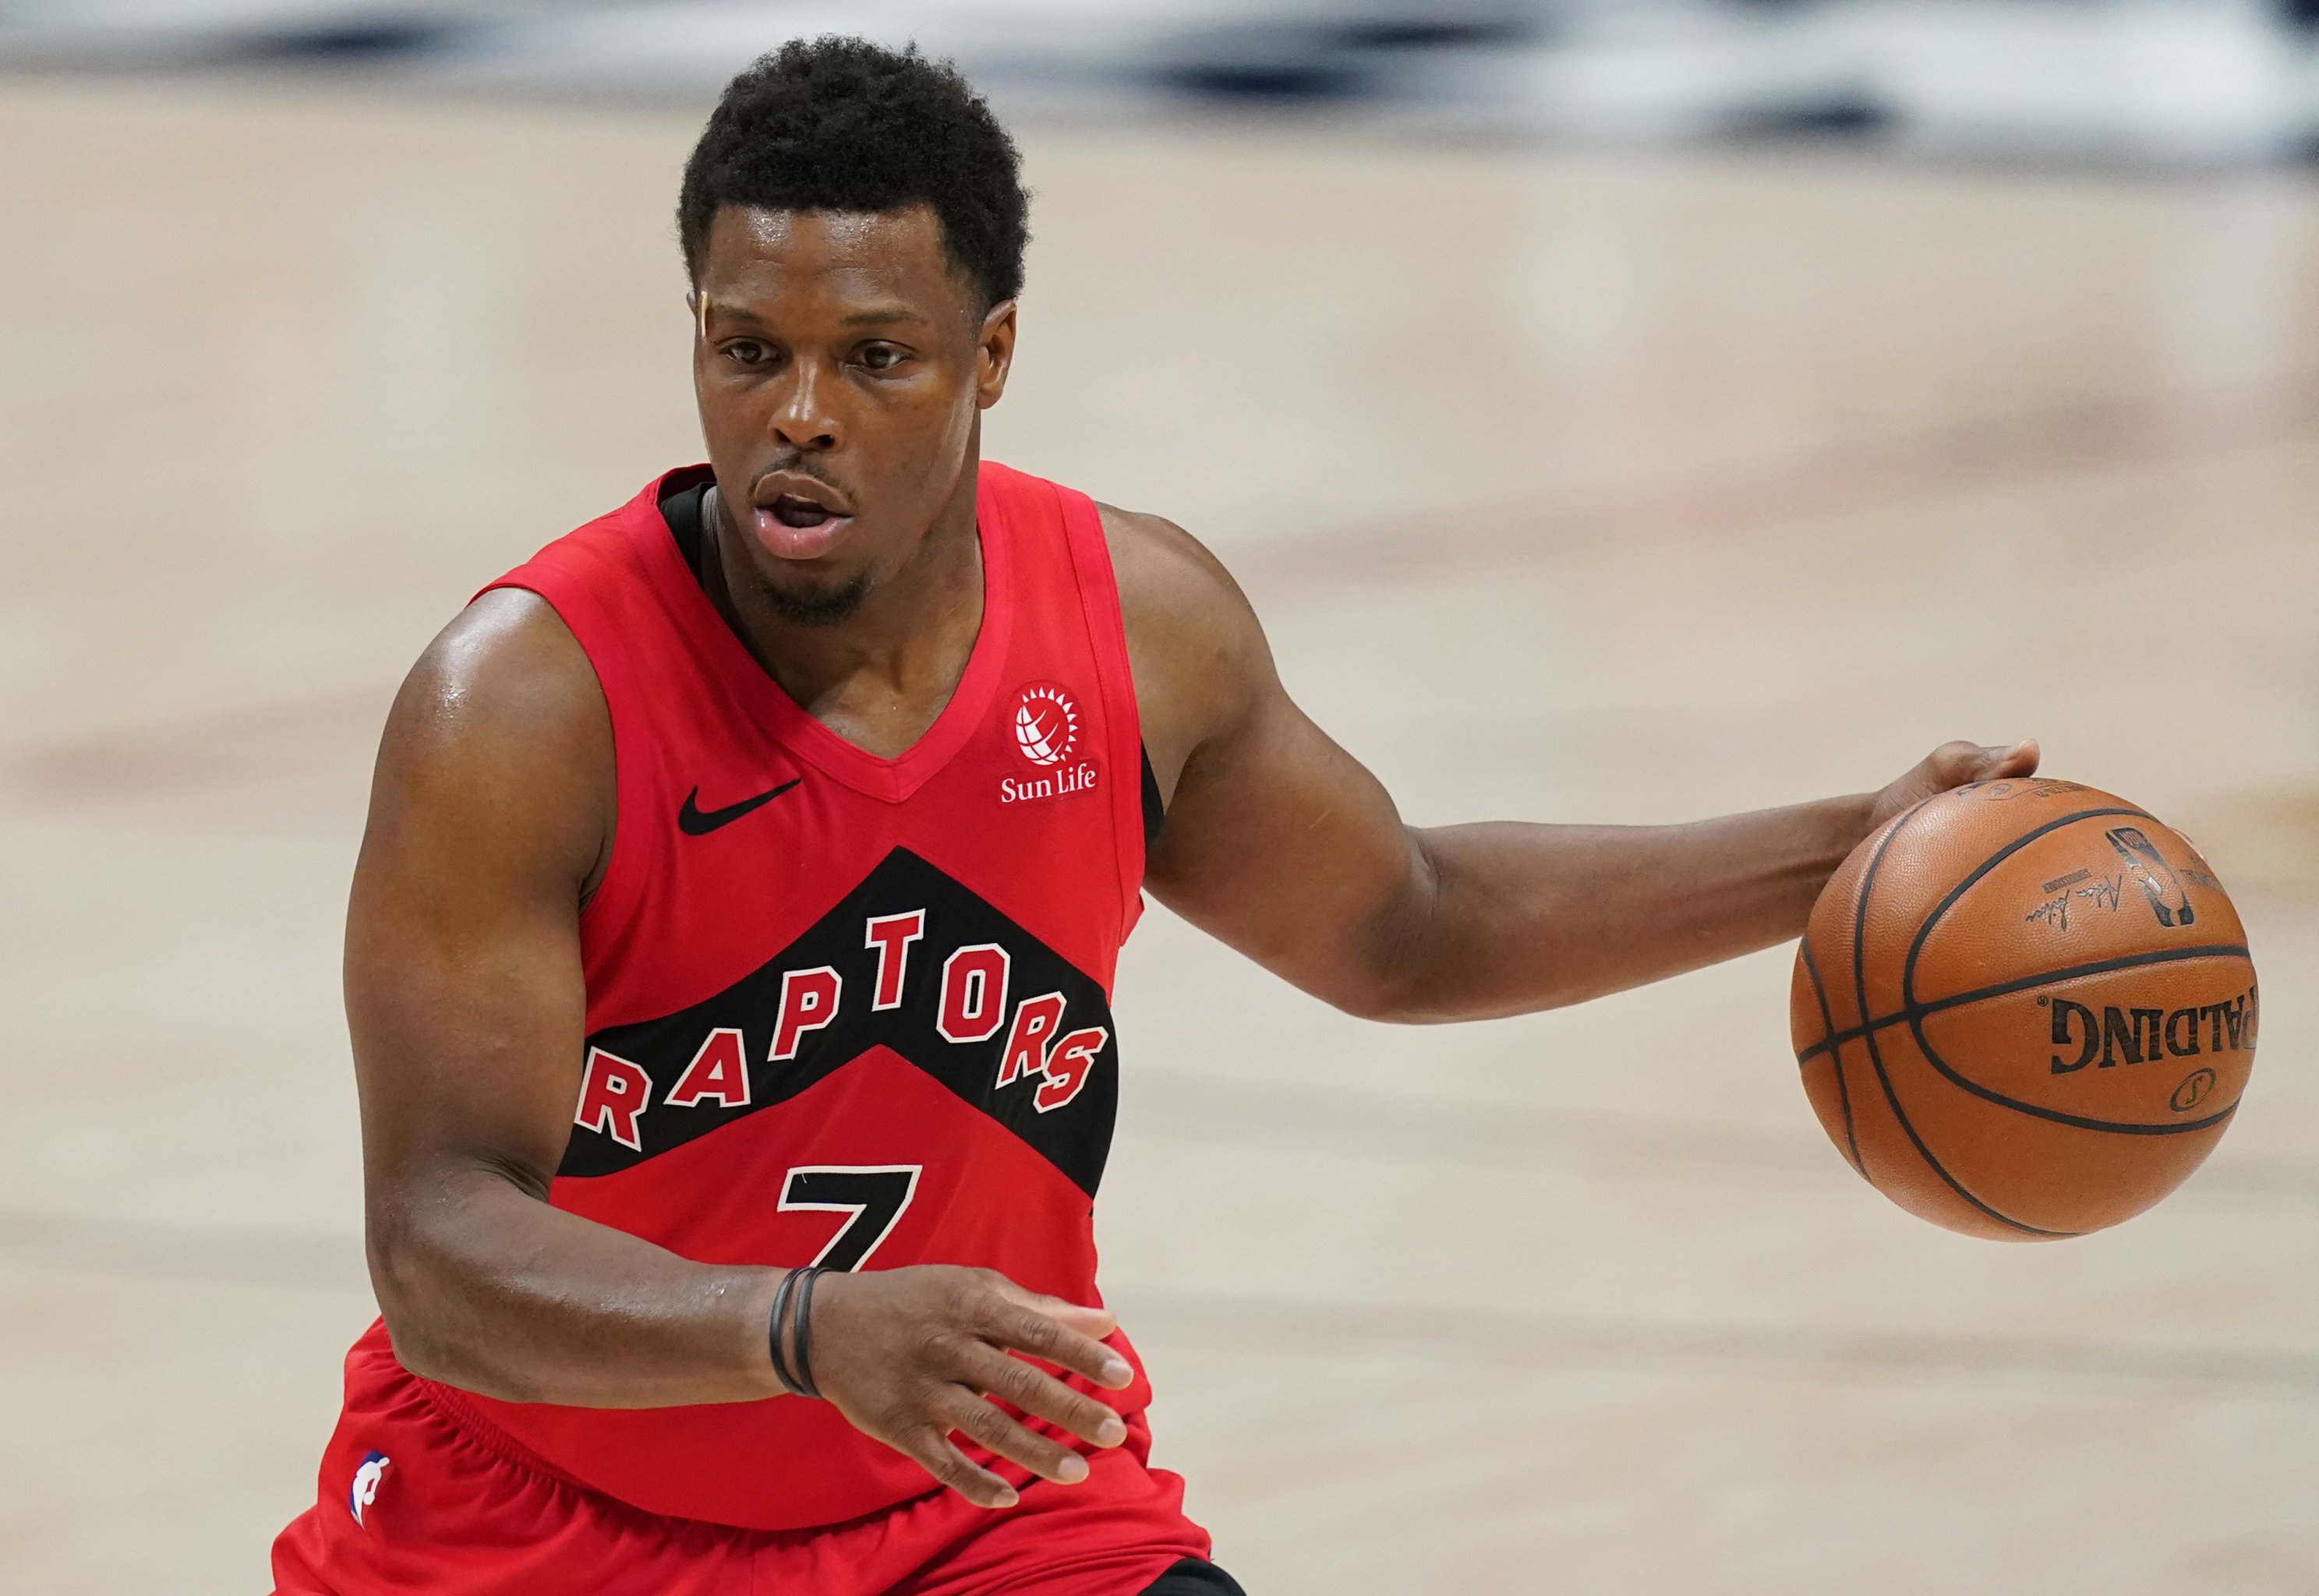 Toronto Rolled The Dice On Scottie Barnes. It's Paid Off